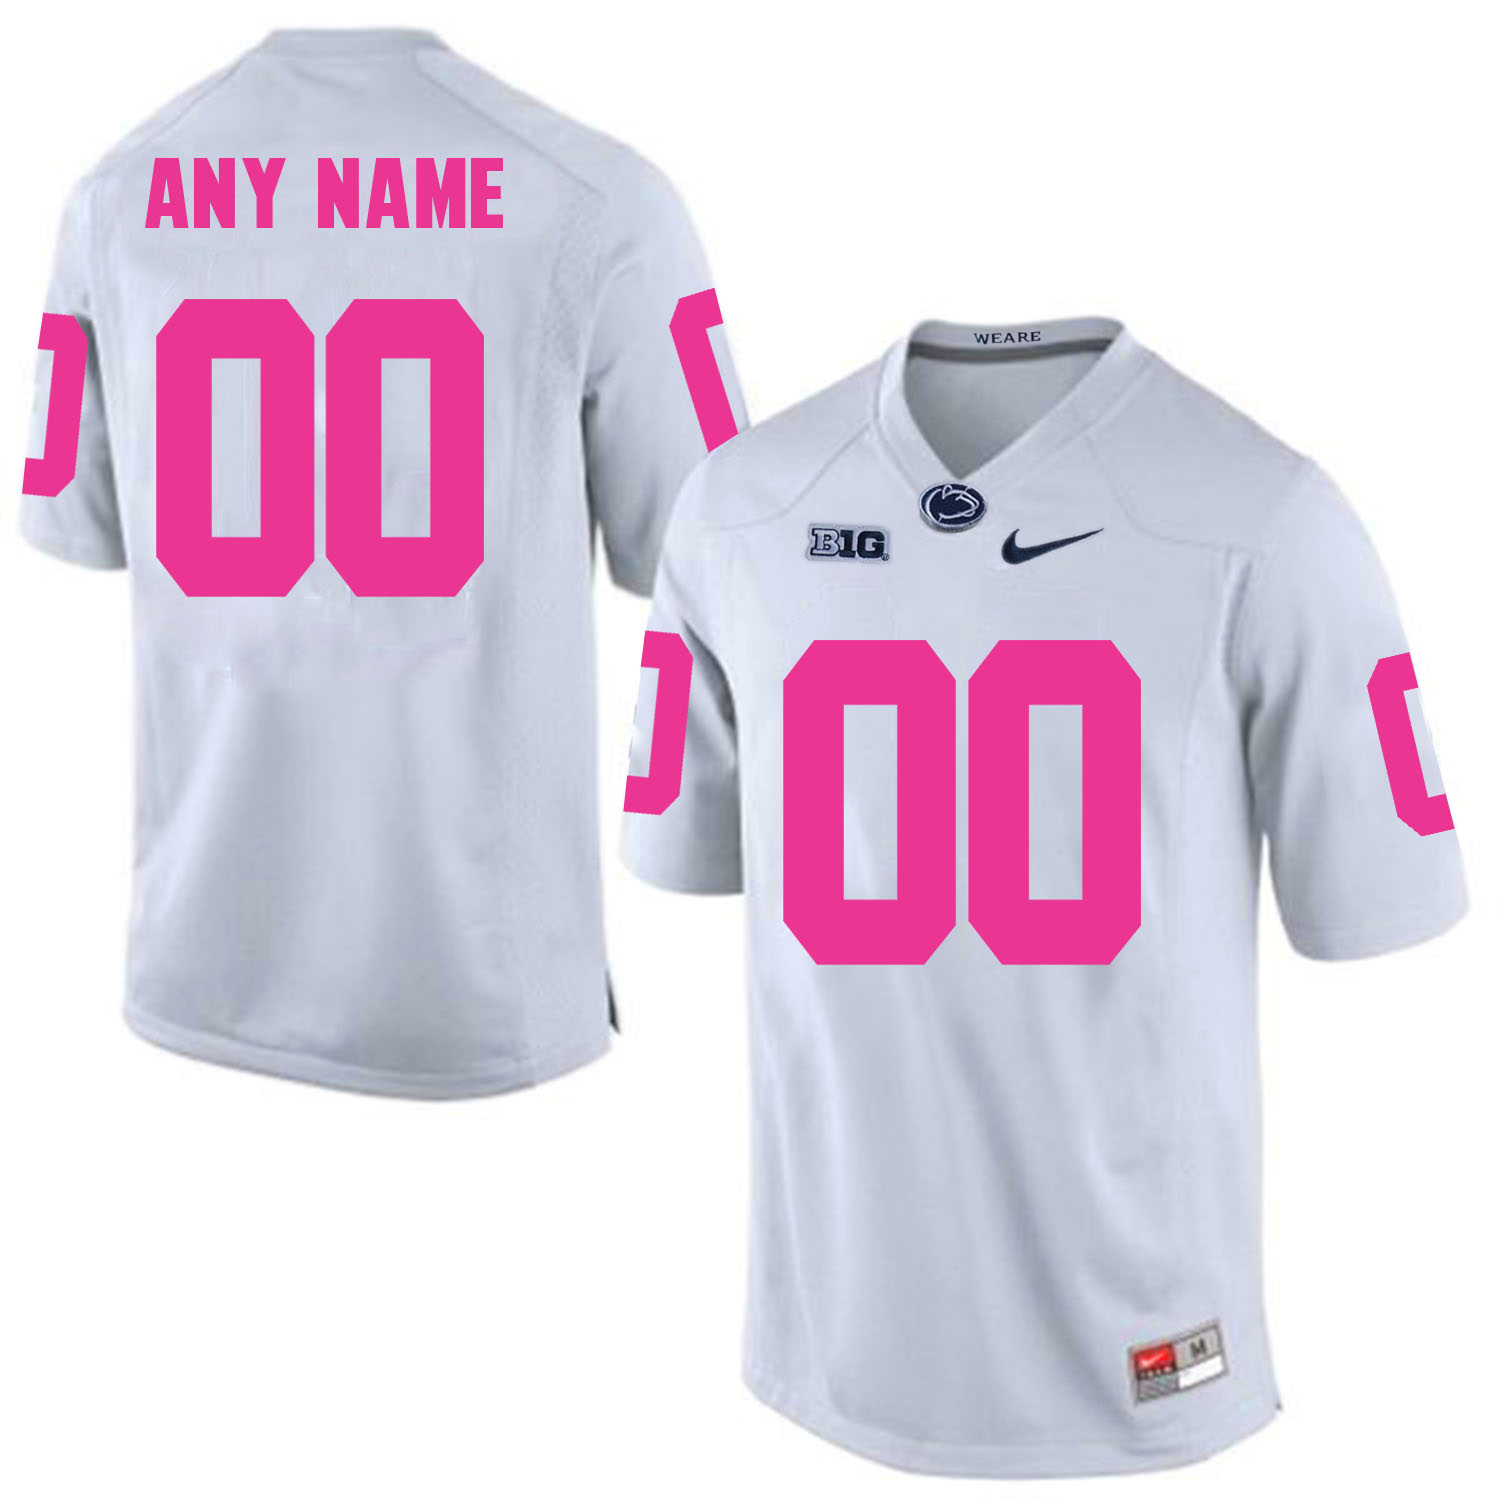 Penn State Nittany Lions White Men's Customized 2018 Breast Cancer Awareness College Football Jersey